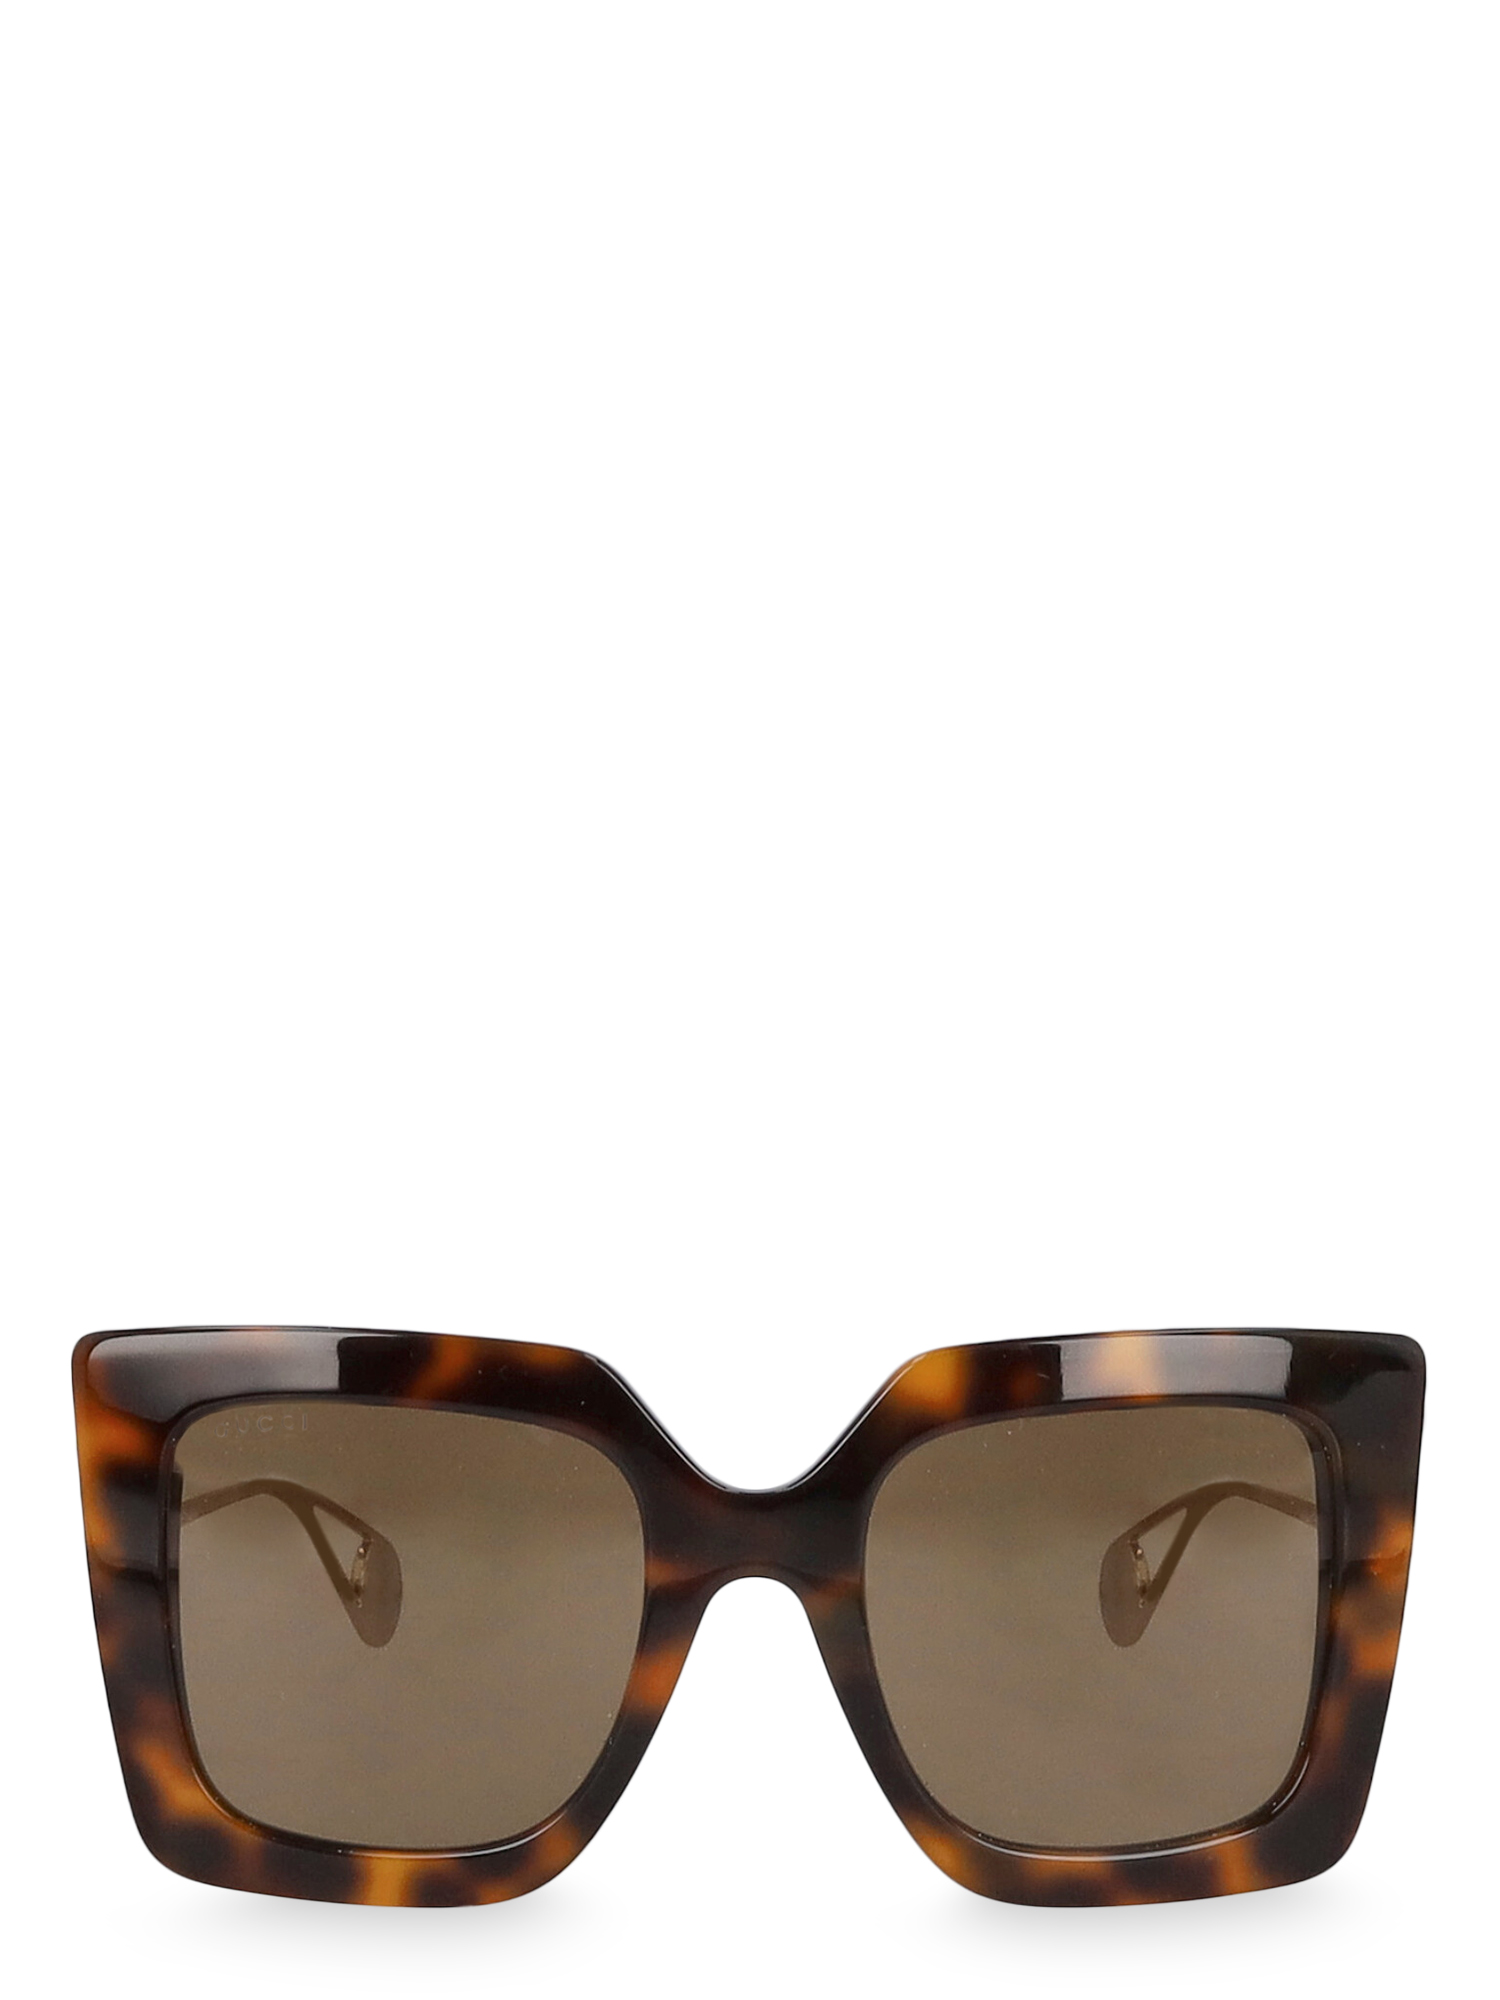 Pre-owned Gucci Women's Sunglasses -  In Brown, Gold